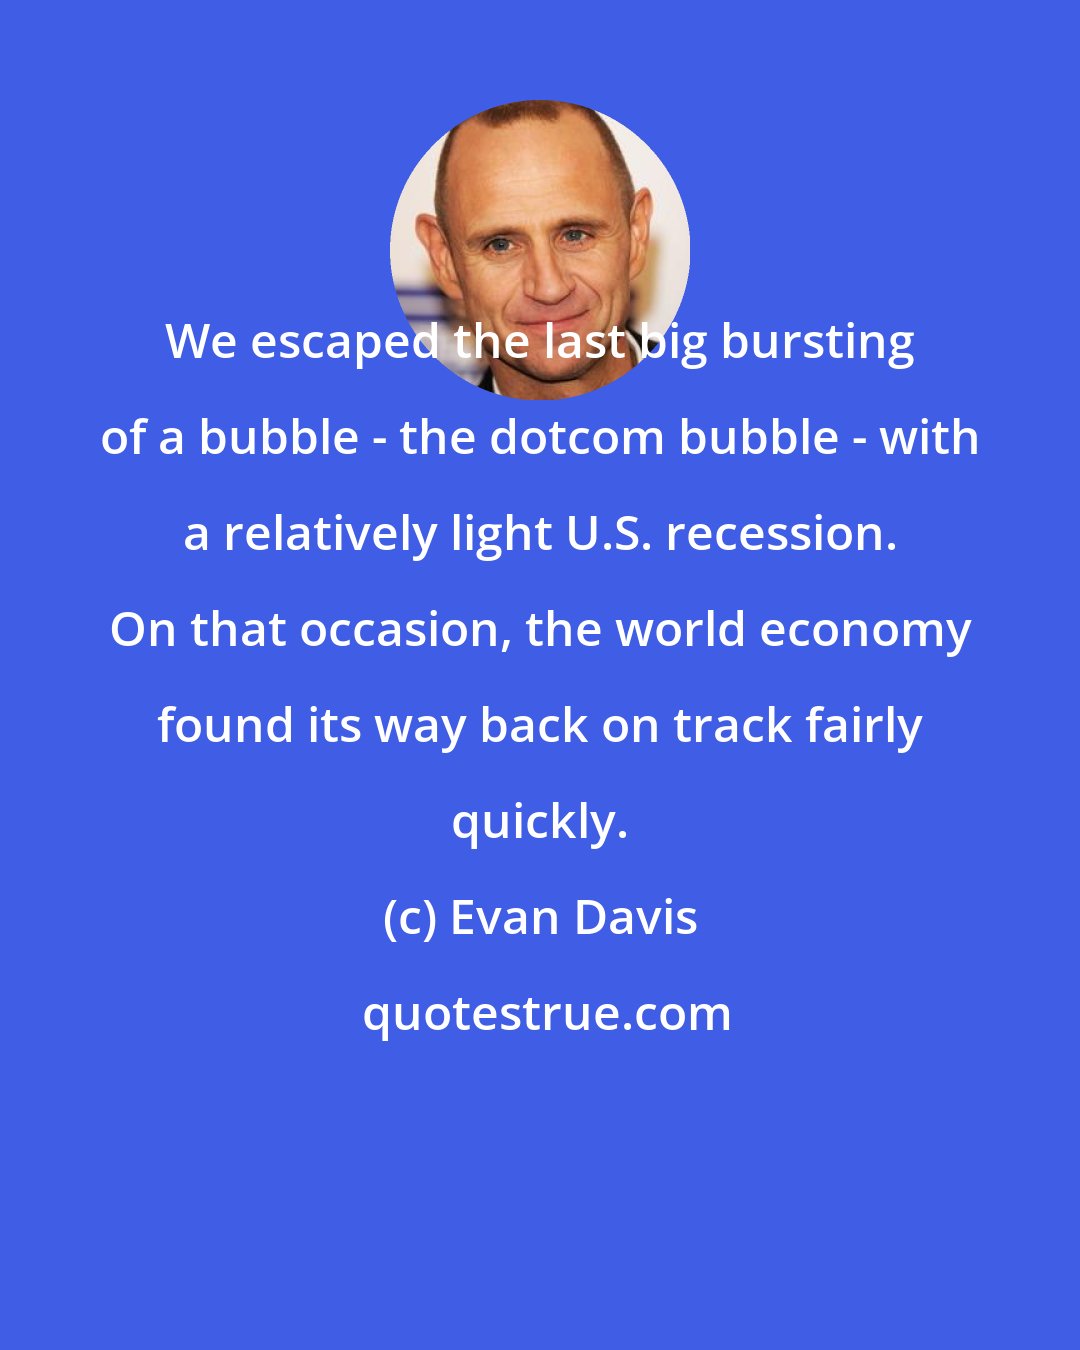 Evan Davis: We escaped the last big bursting of a bubble - the dotcom bubble - with a relatively light U.S. recession. On that occasion, the world economy found its way back on track fairly quickly.